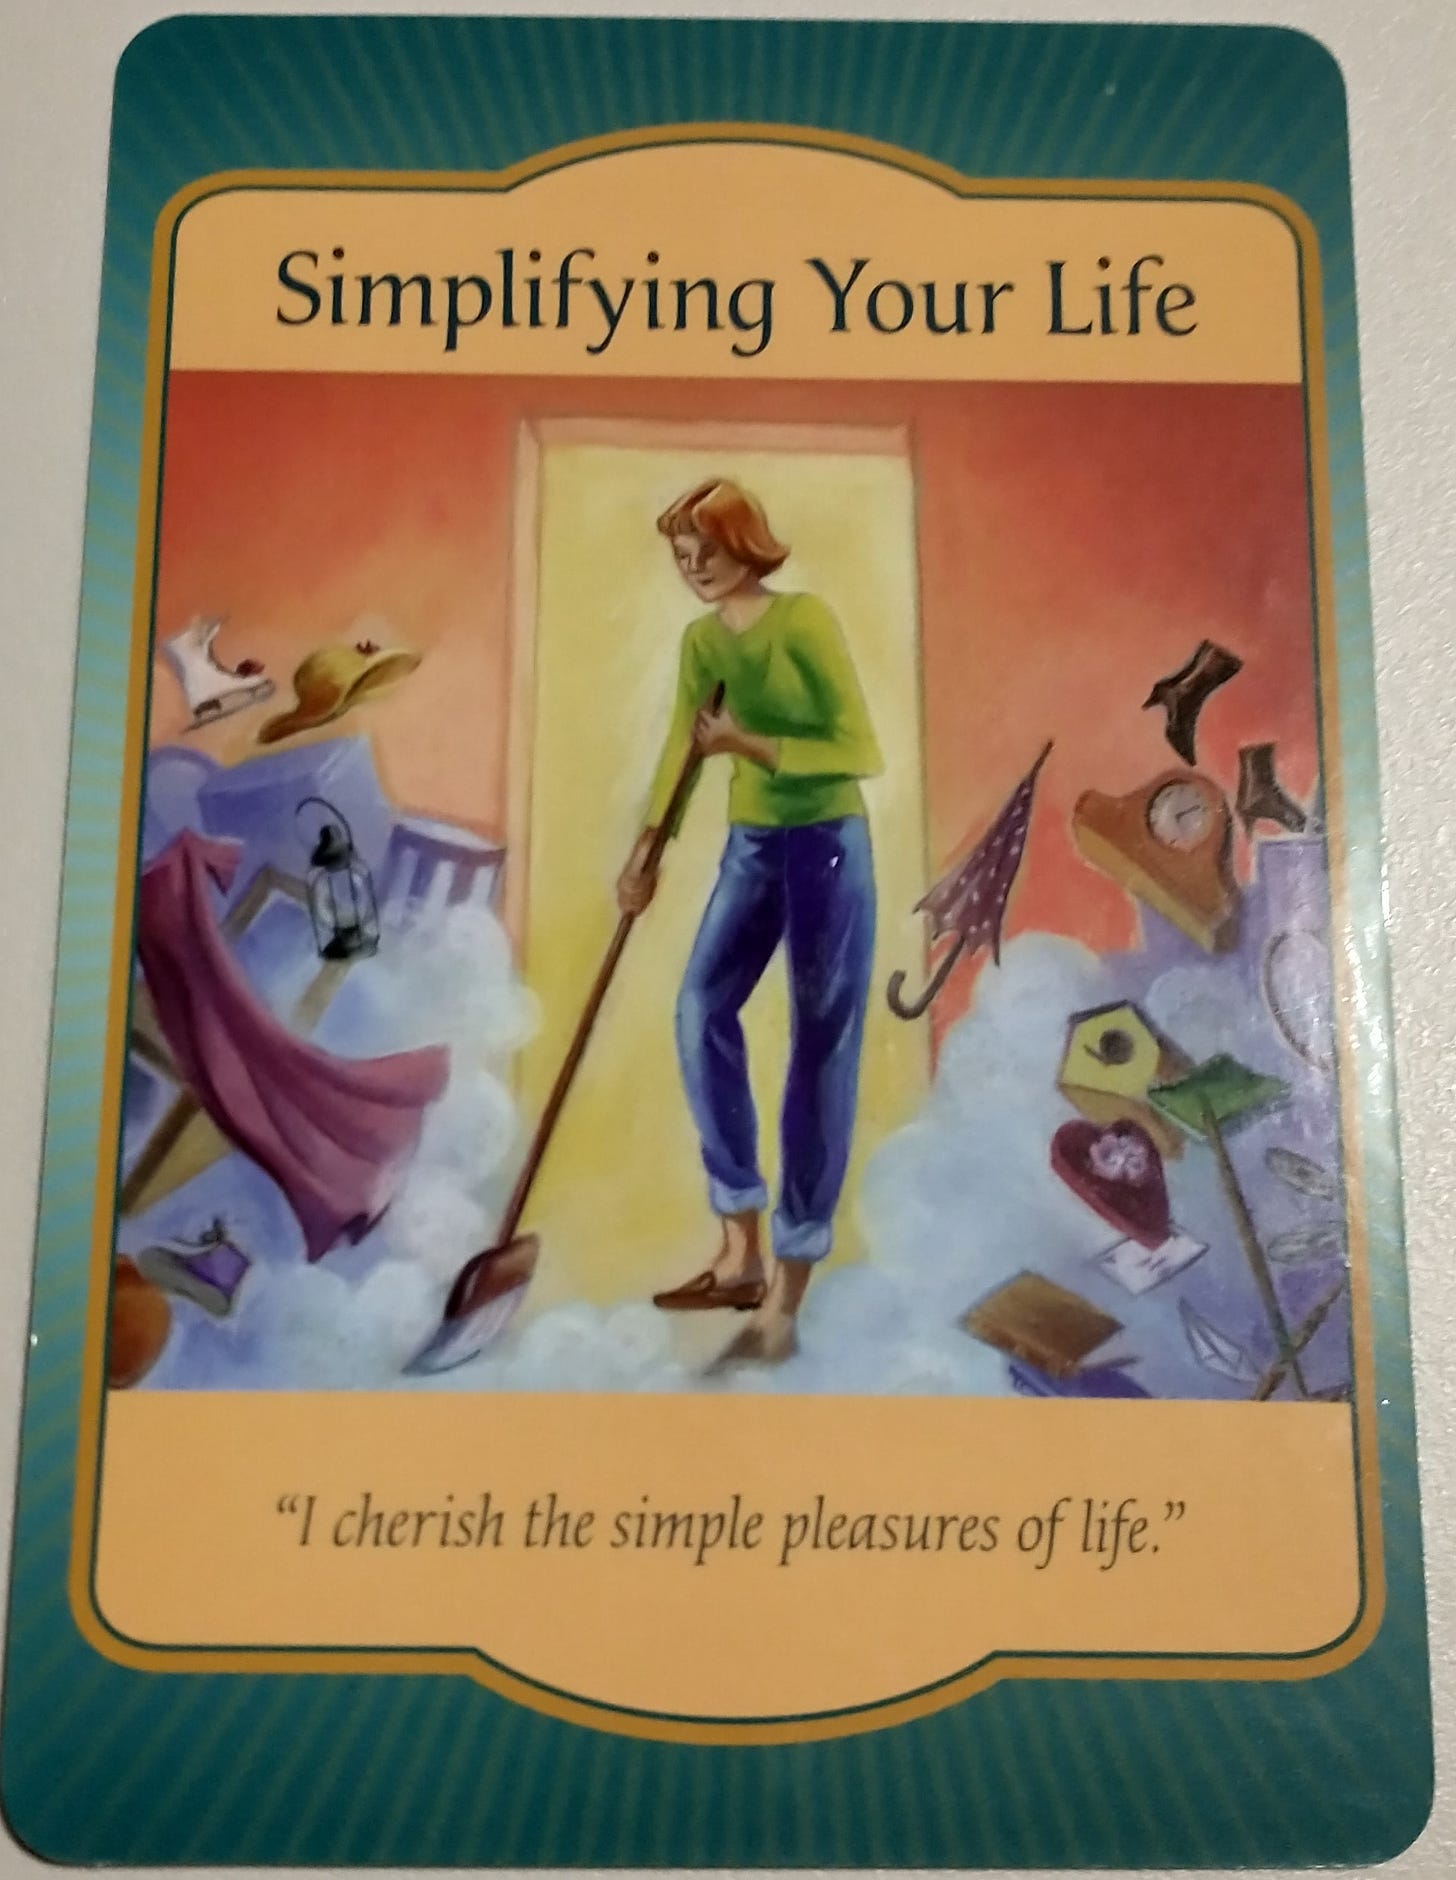 Simplifying Your Life: “I cherish the simple pleasures of life.”